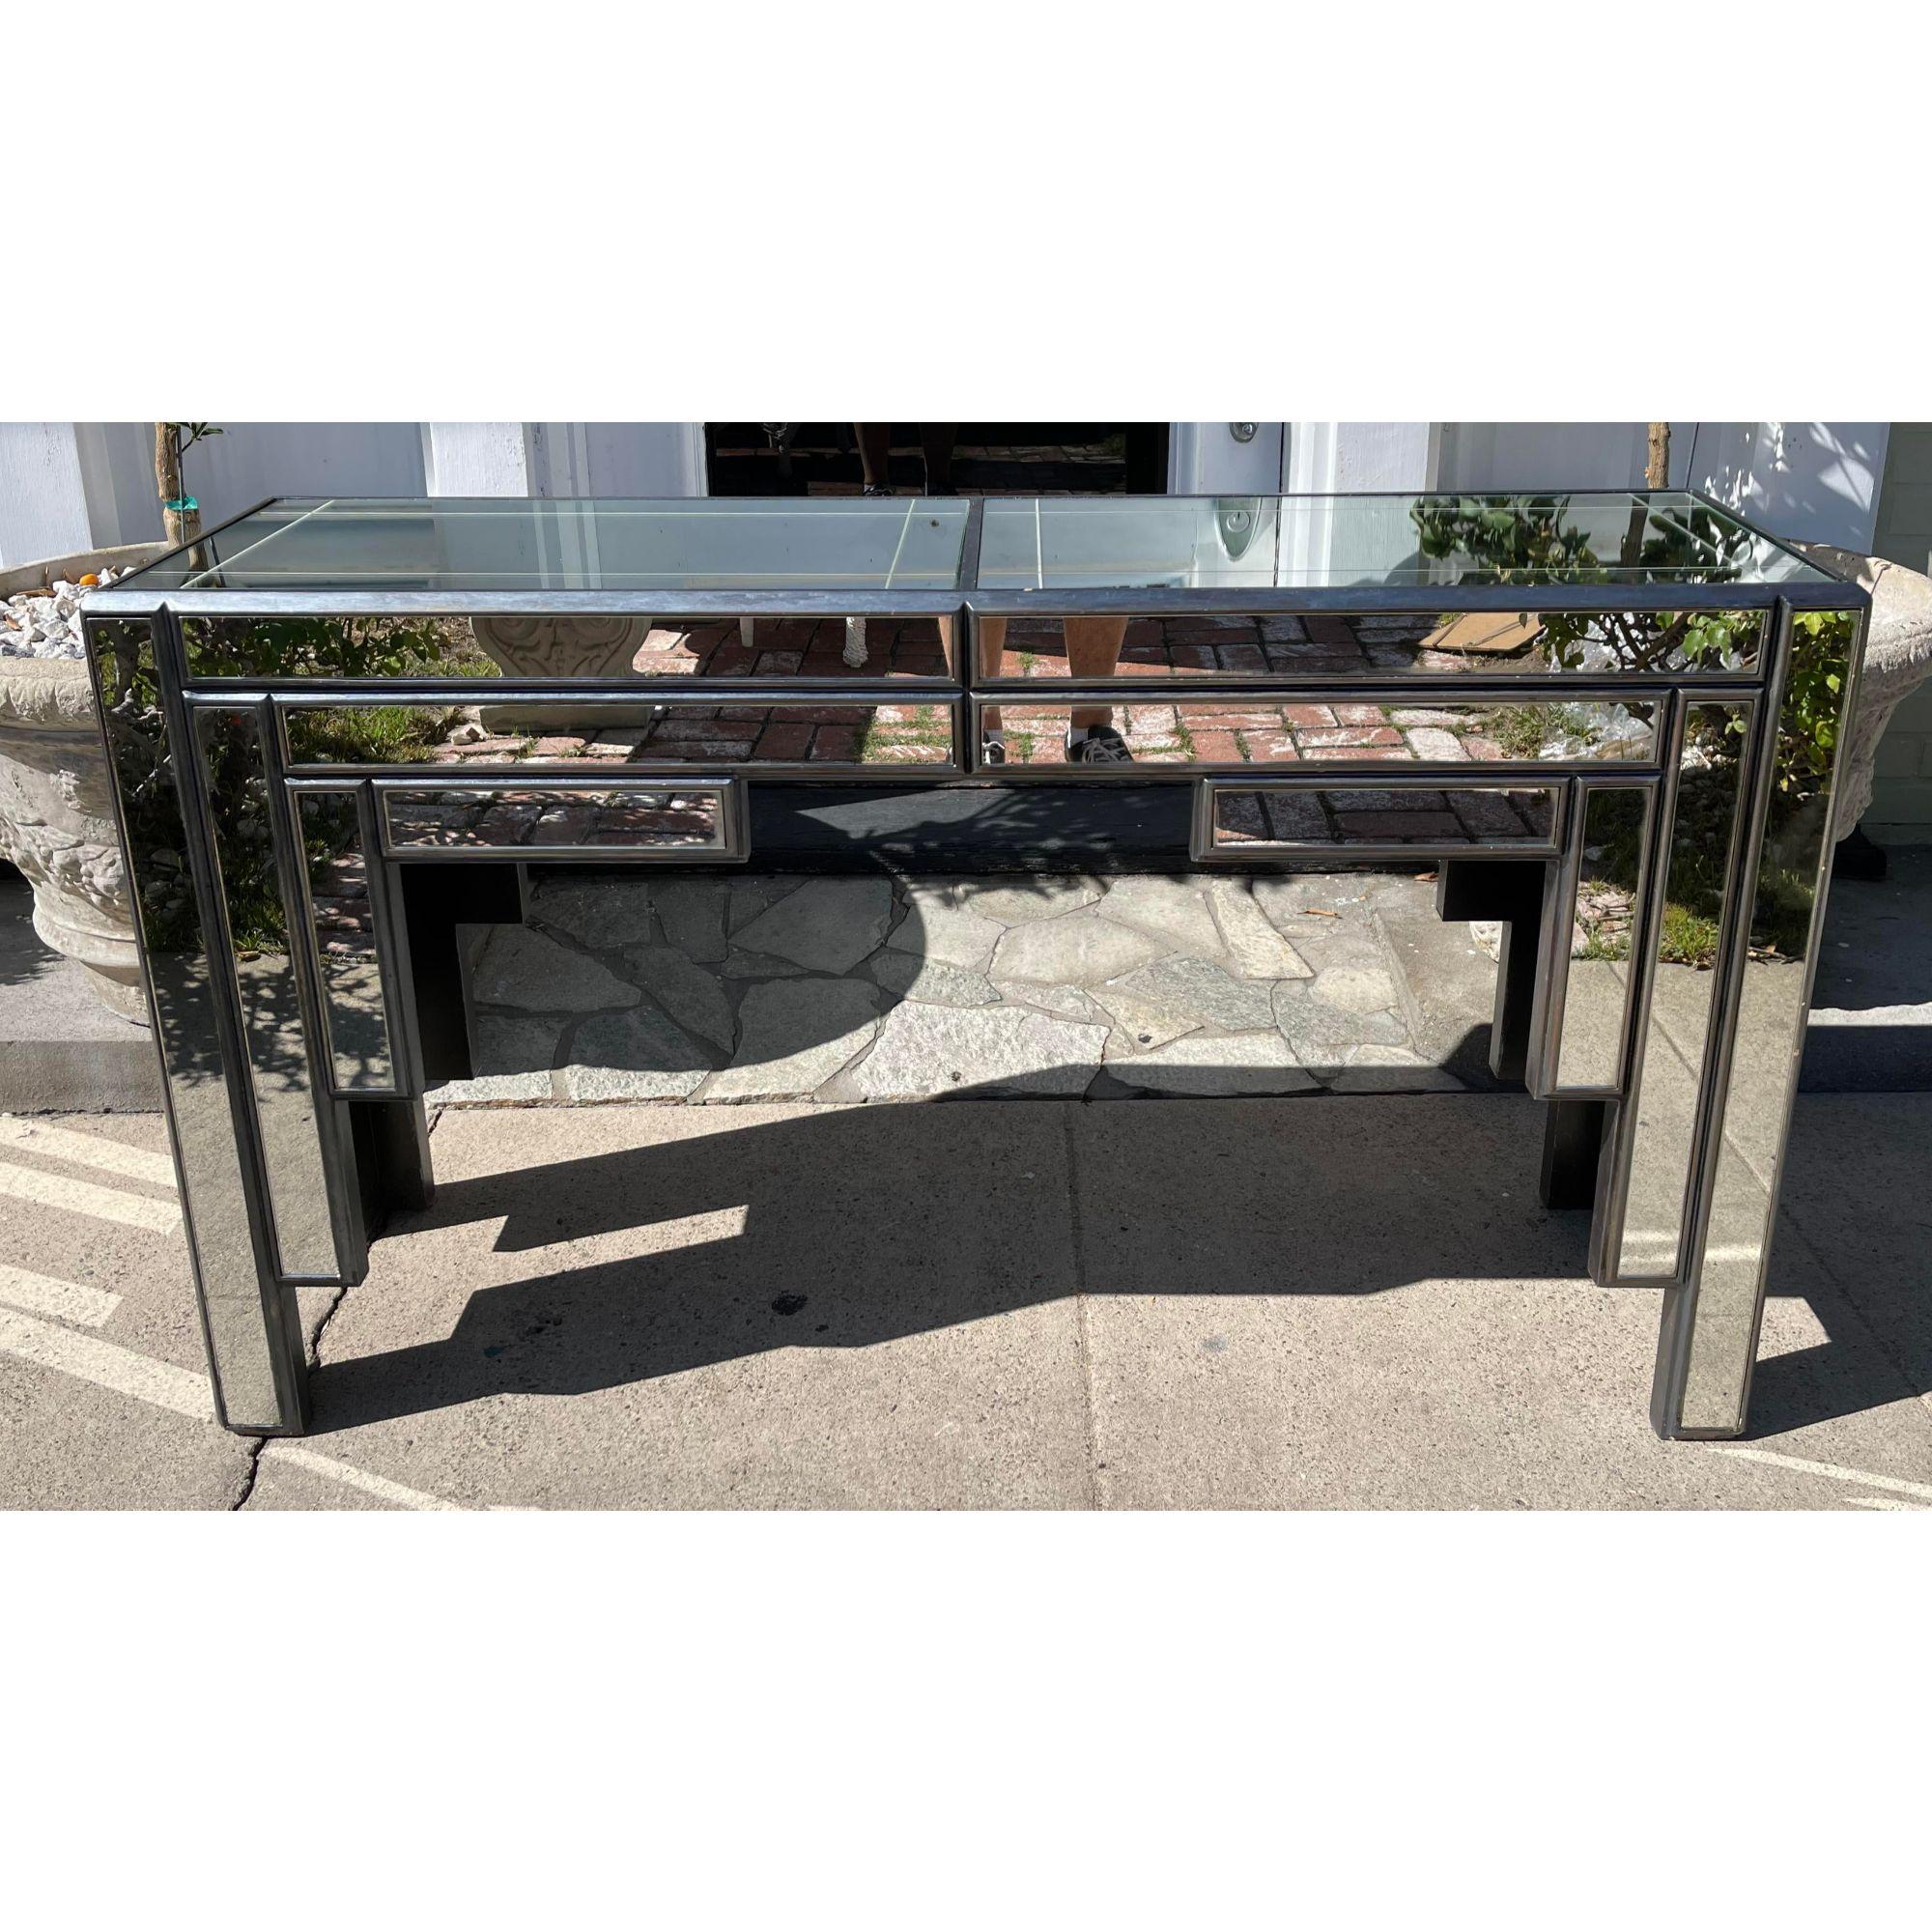 Vintage Art Deco Mirrored Theater Console Table 3